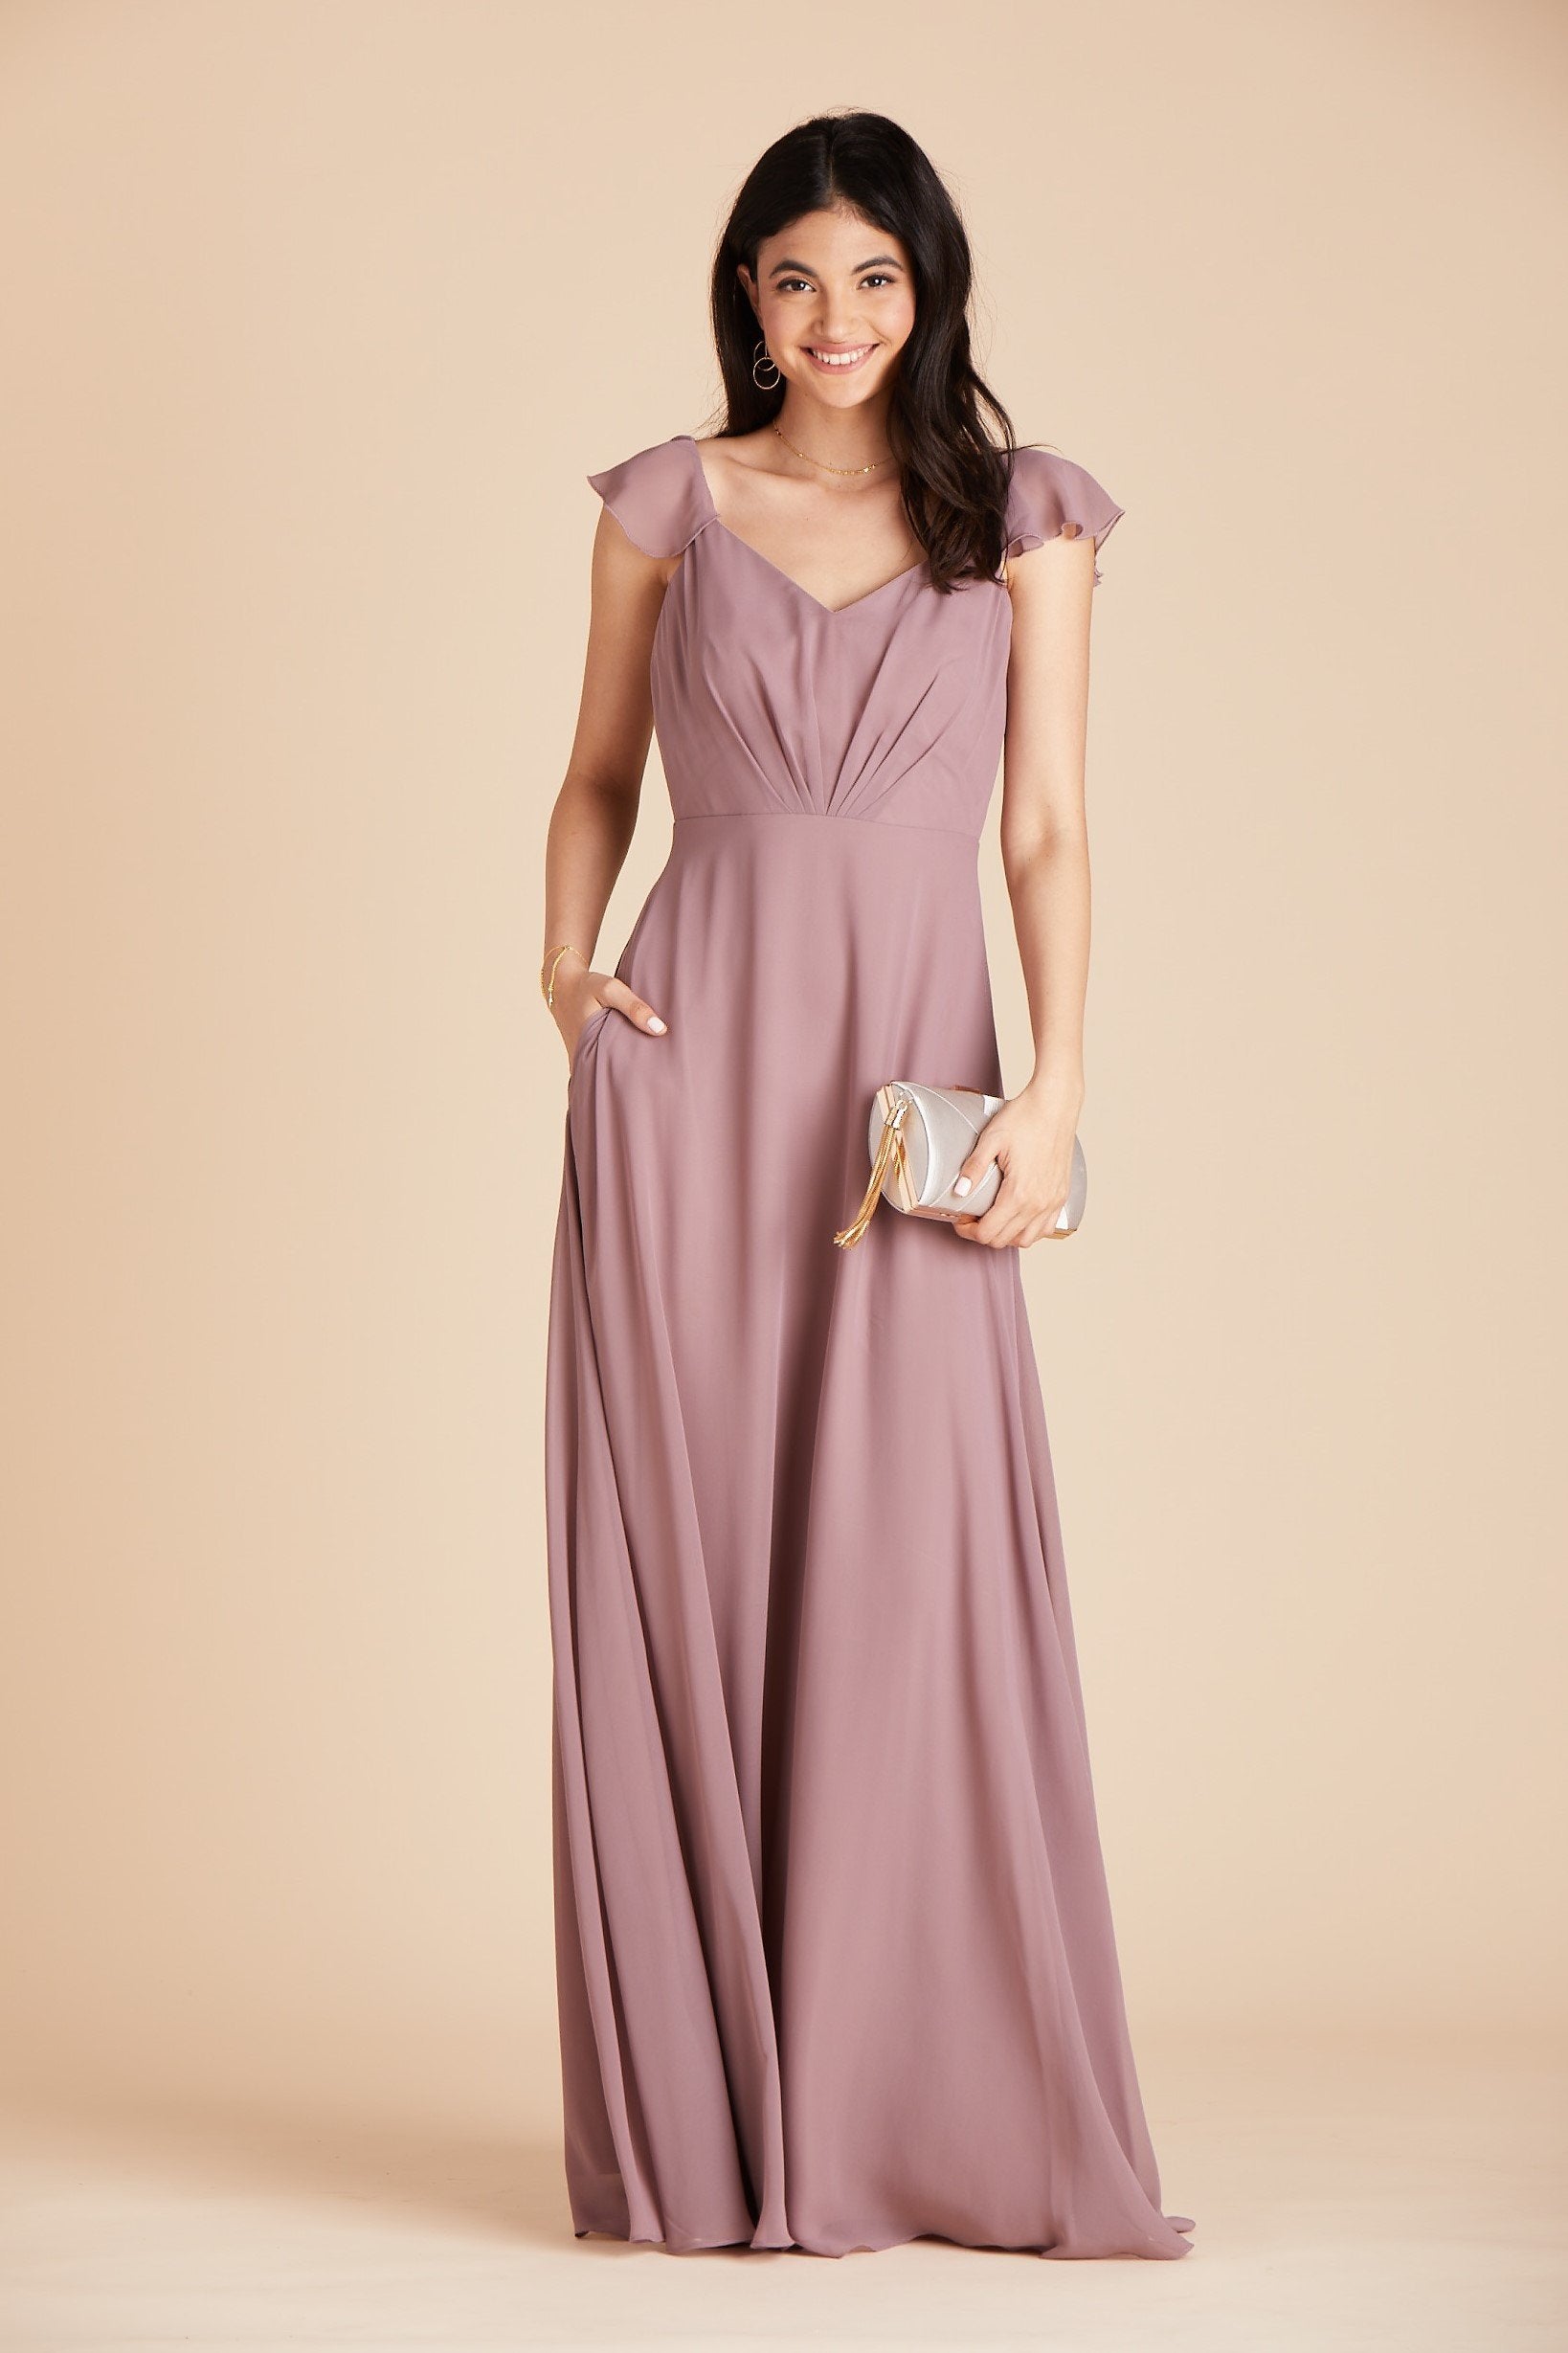 Kae bridesmaids dress in dark mauve purple chiffon by Birdy Grey, front view with hand in pocket